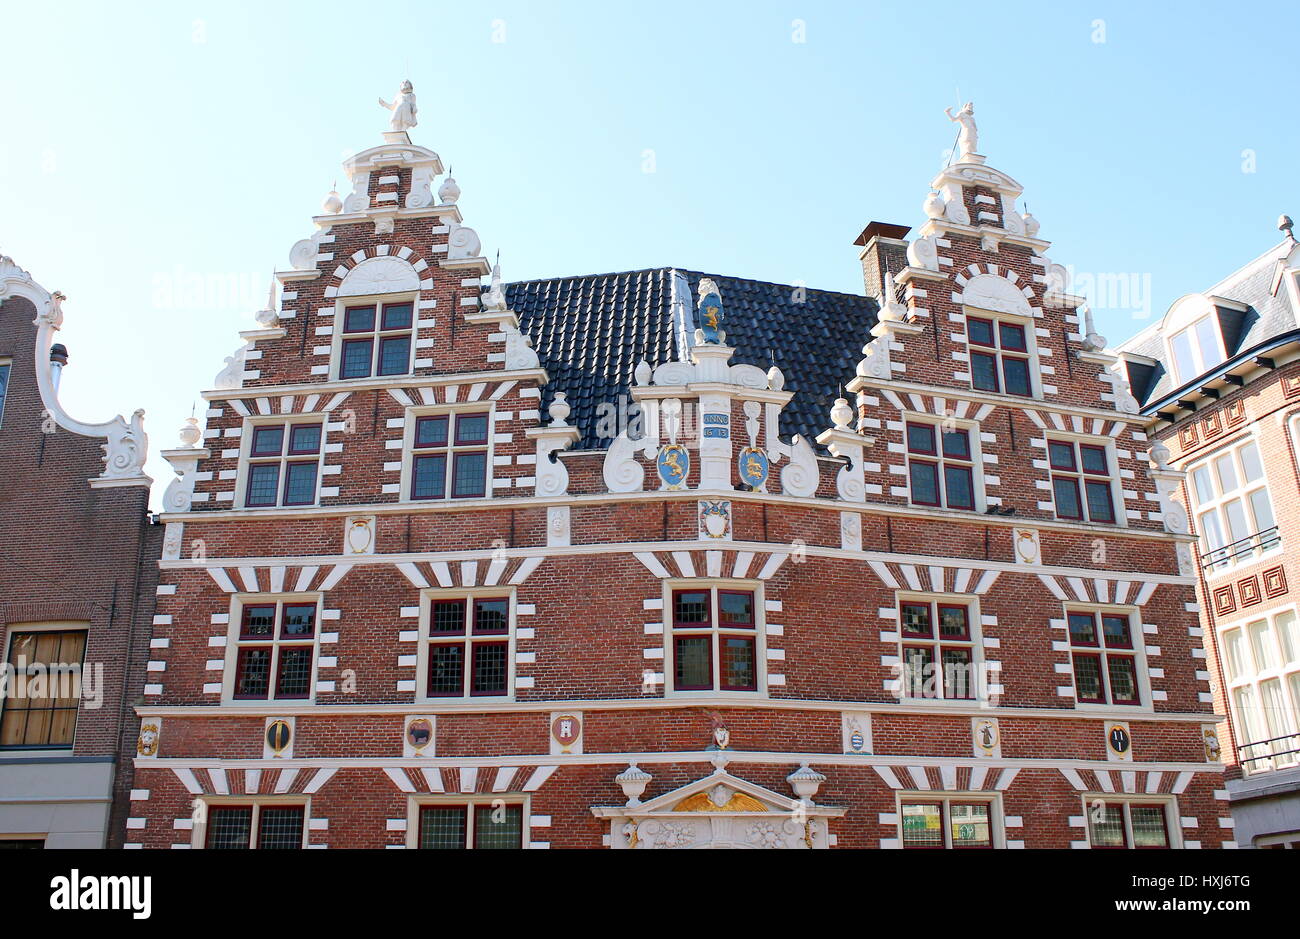 Monumental Statenlogement (1622), former hotel & city hall (until 1977) in Hoorn, Noord-Holland, Netherlands. Renowned for double crow stepped gables Stock Photo